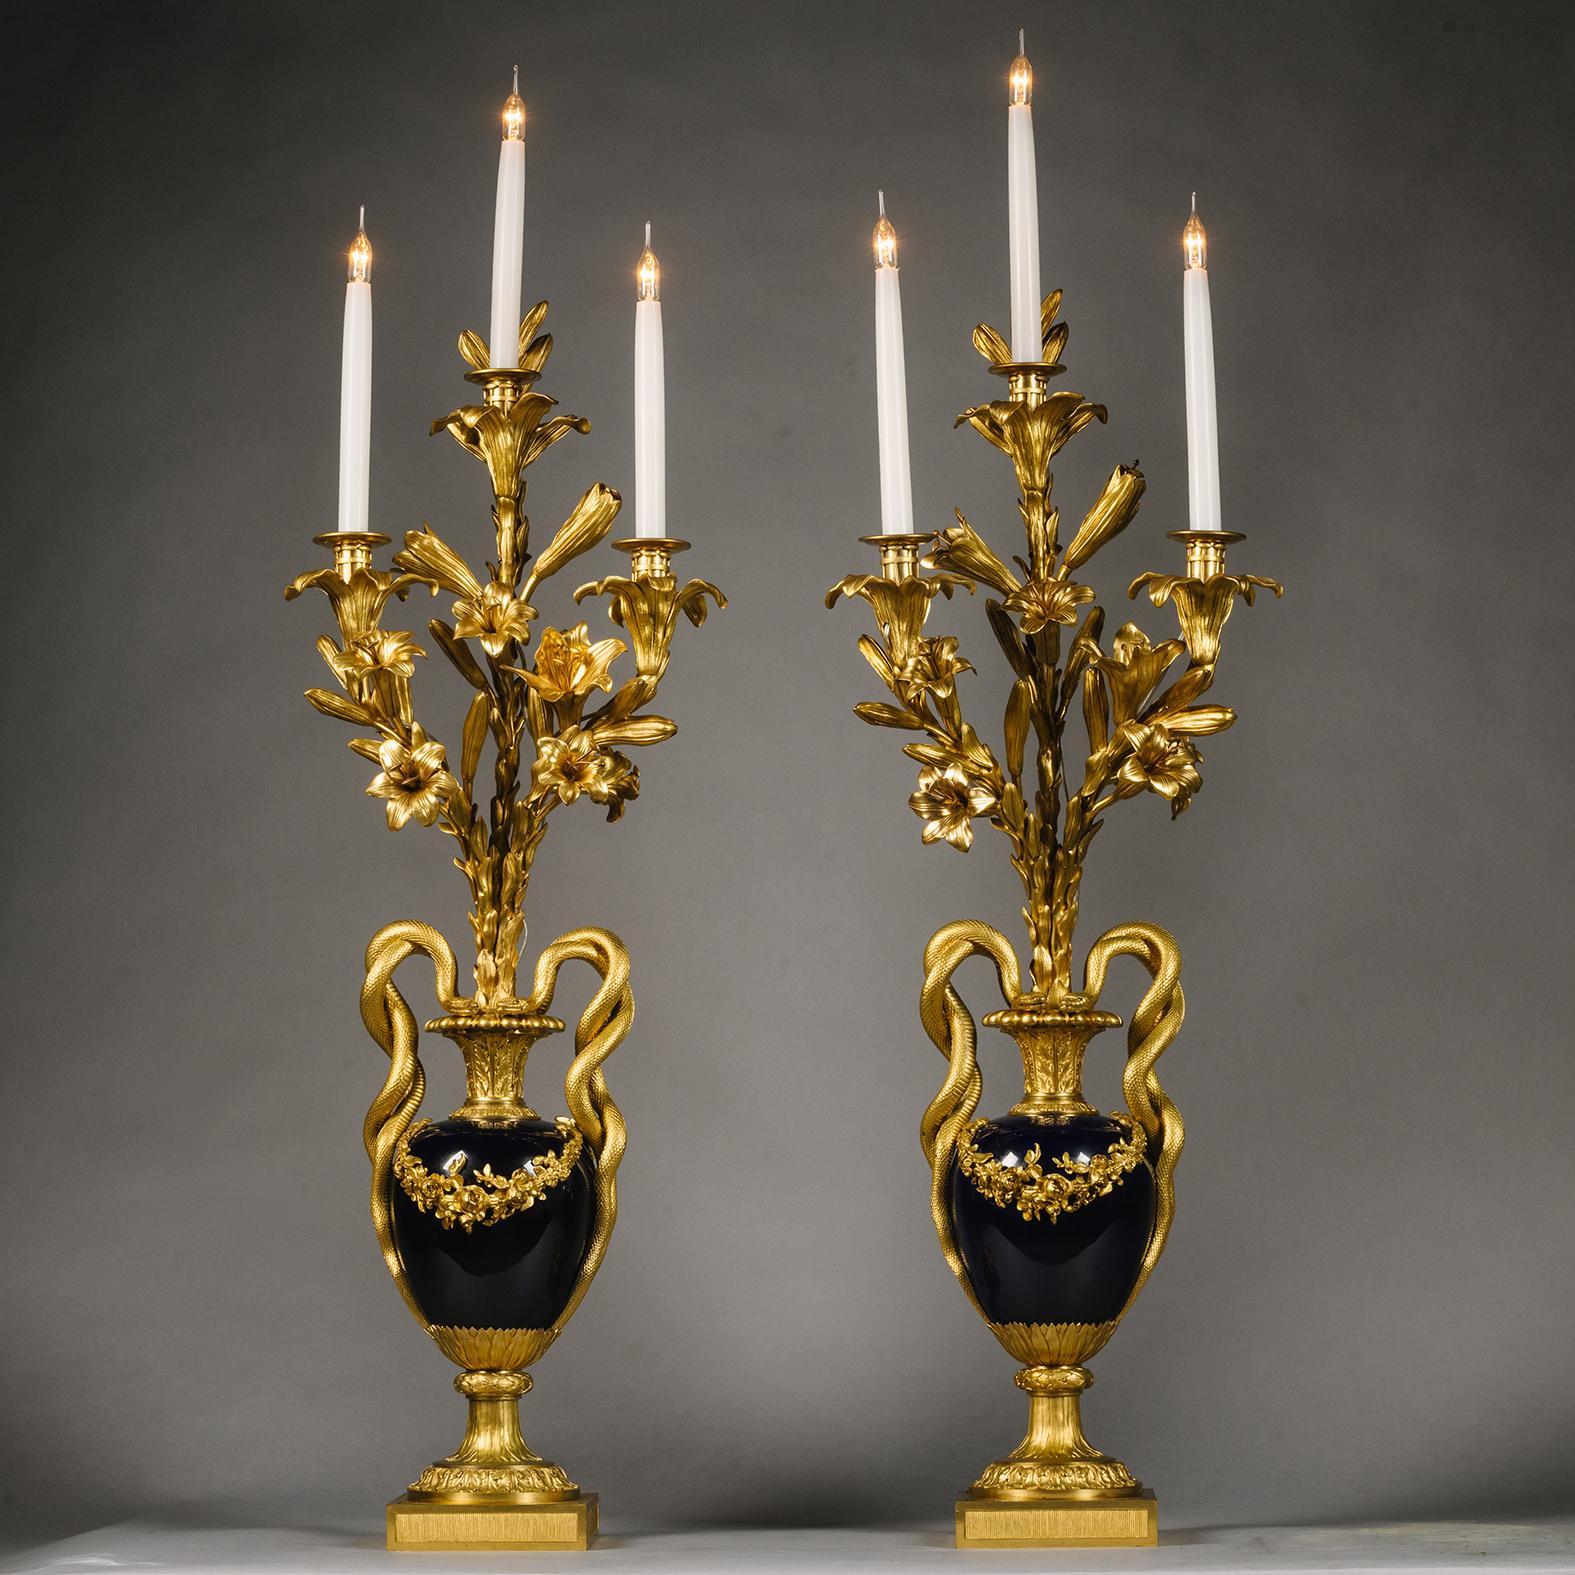 A Pair Of Louis XVI Style Gilt-Bronze And Royal Blue Sèvres-Style Porcelain Three-Light Vase Candelabra.

Each baluster-form vase applied with a fruiting swag, flanked by twin entwined-serpent handles, issuing lily flower branches with three candle